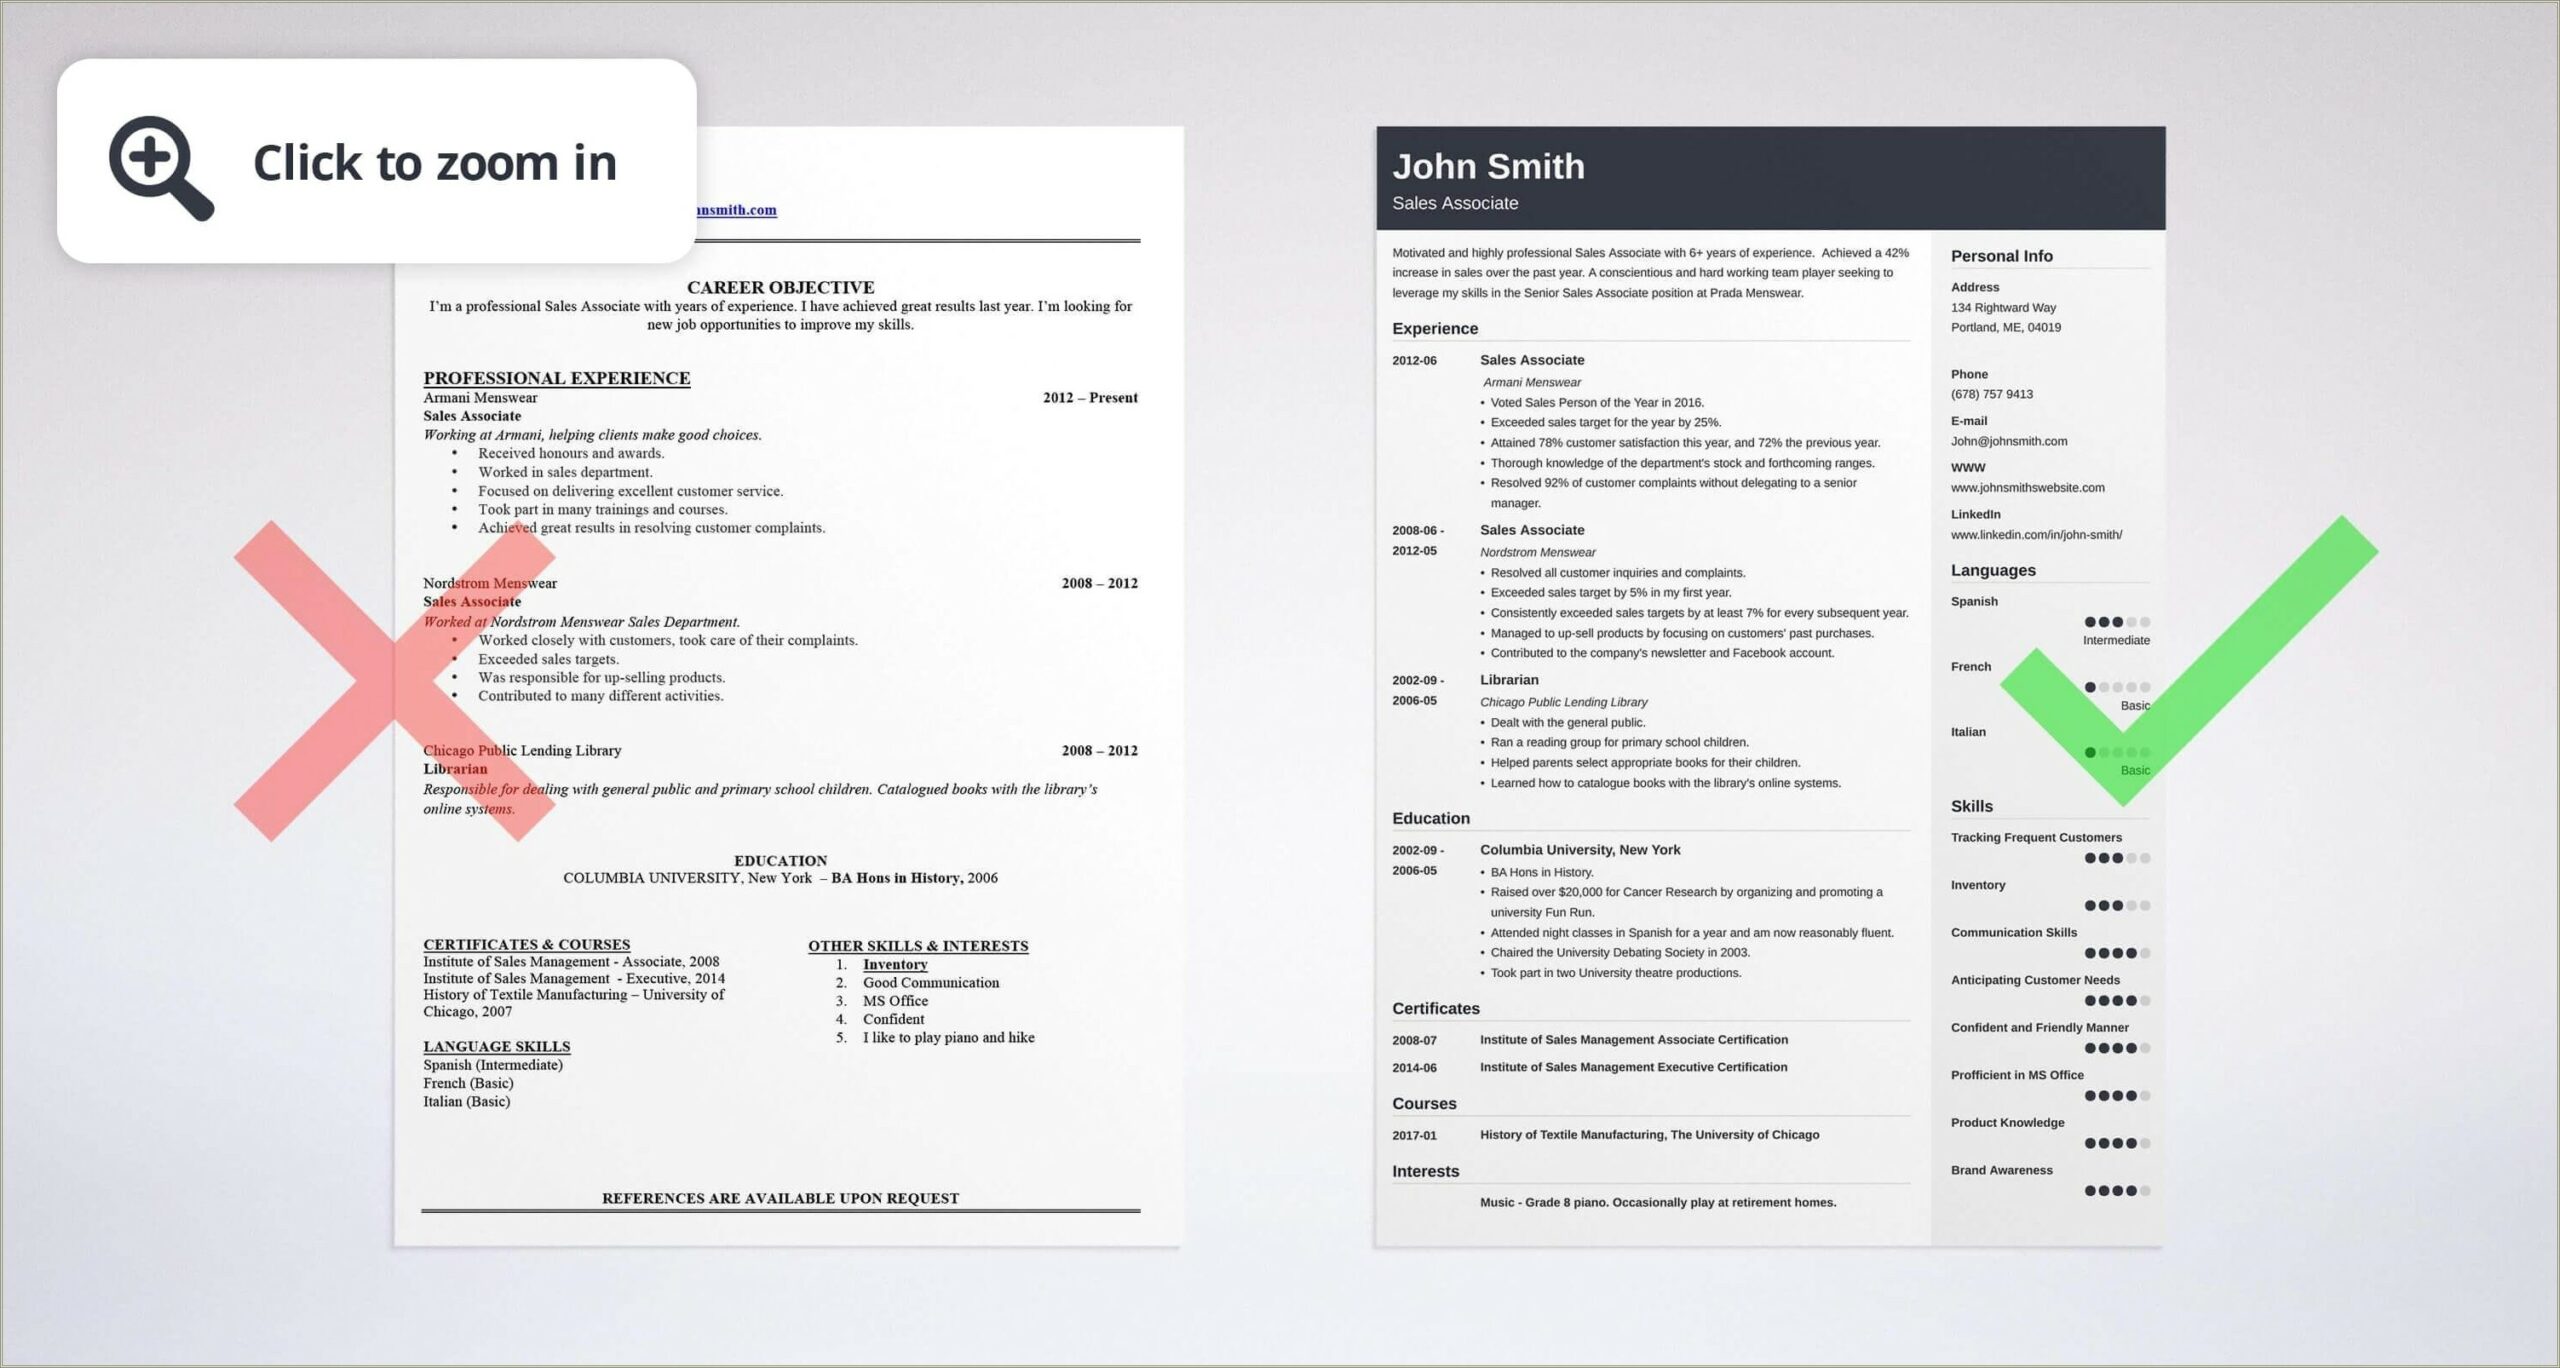 Sample Areas Of Practice In A Resume